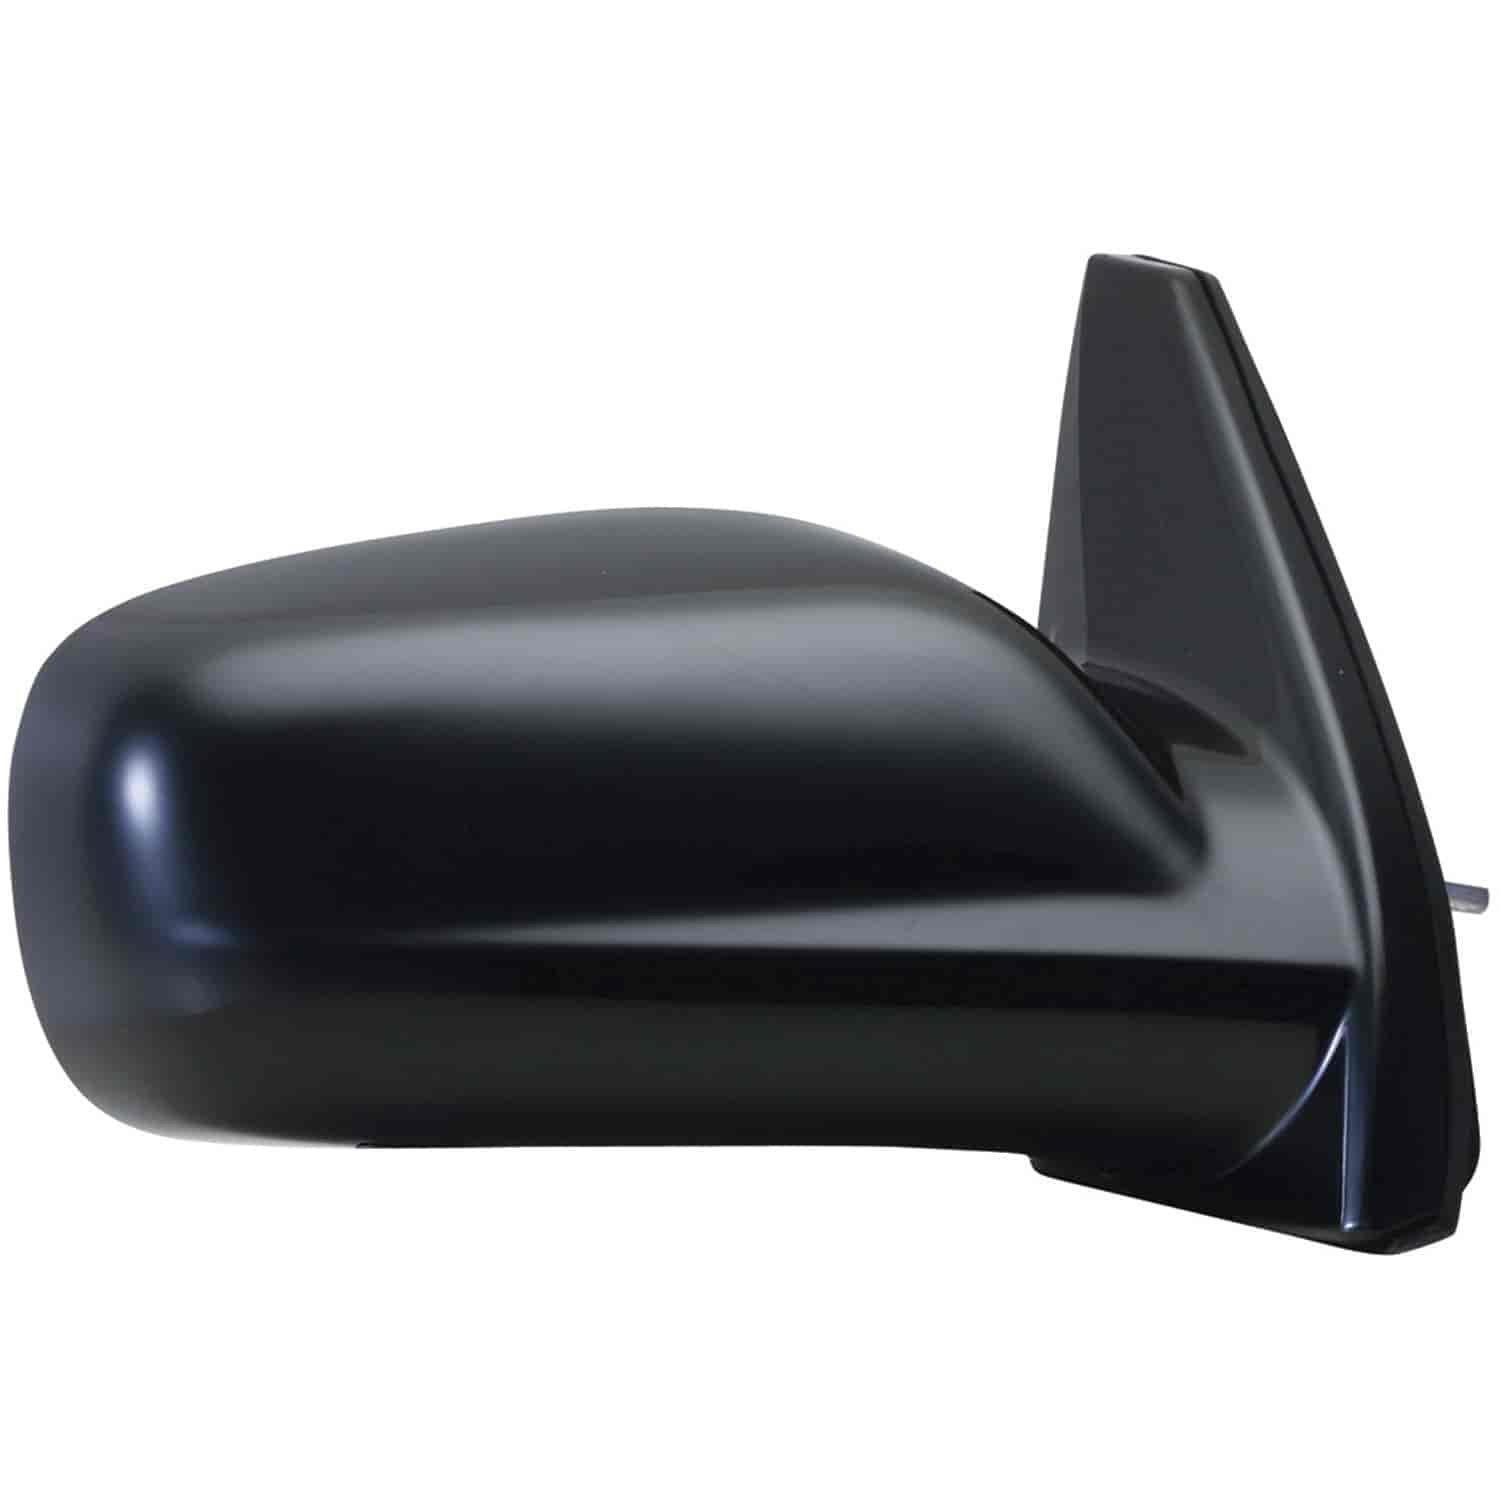 OEM Style Replacement mirror for 03-08 Toyota Matrix passenger side mirror tested to fit and functio